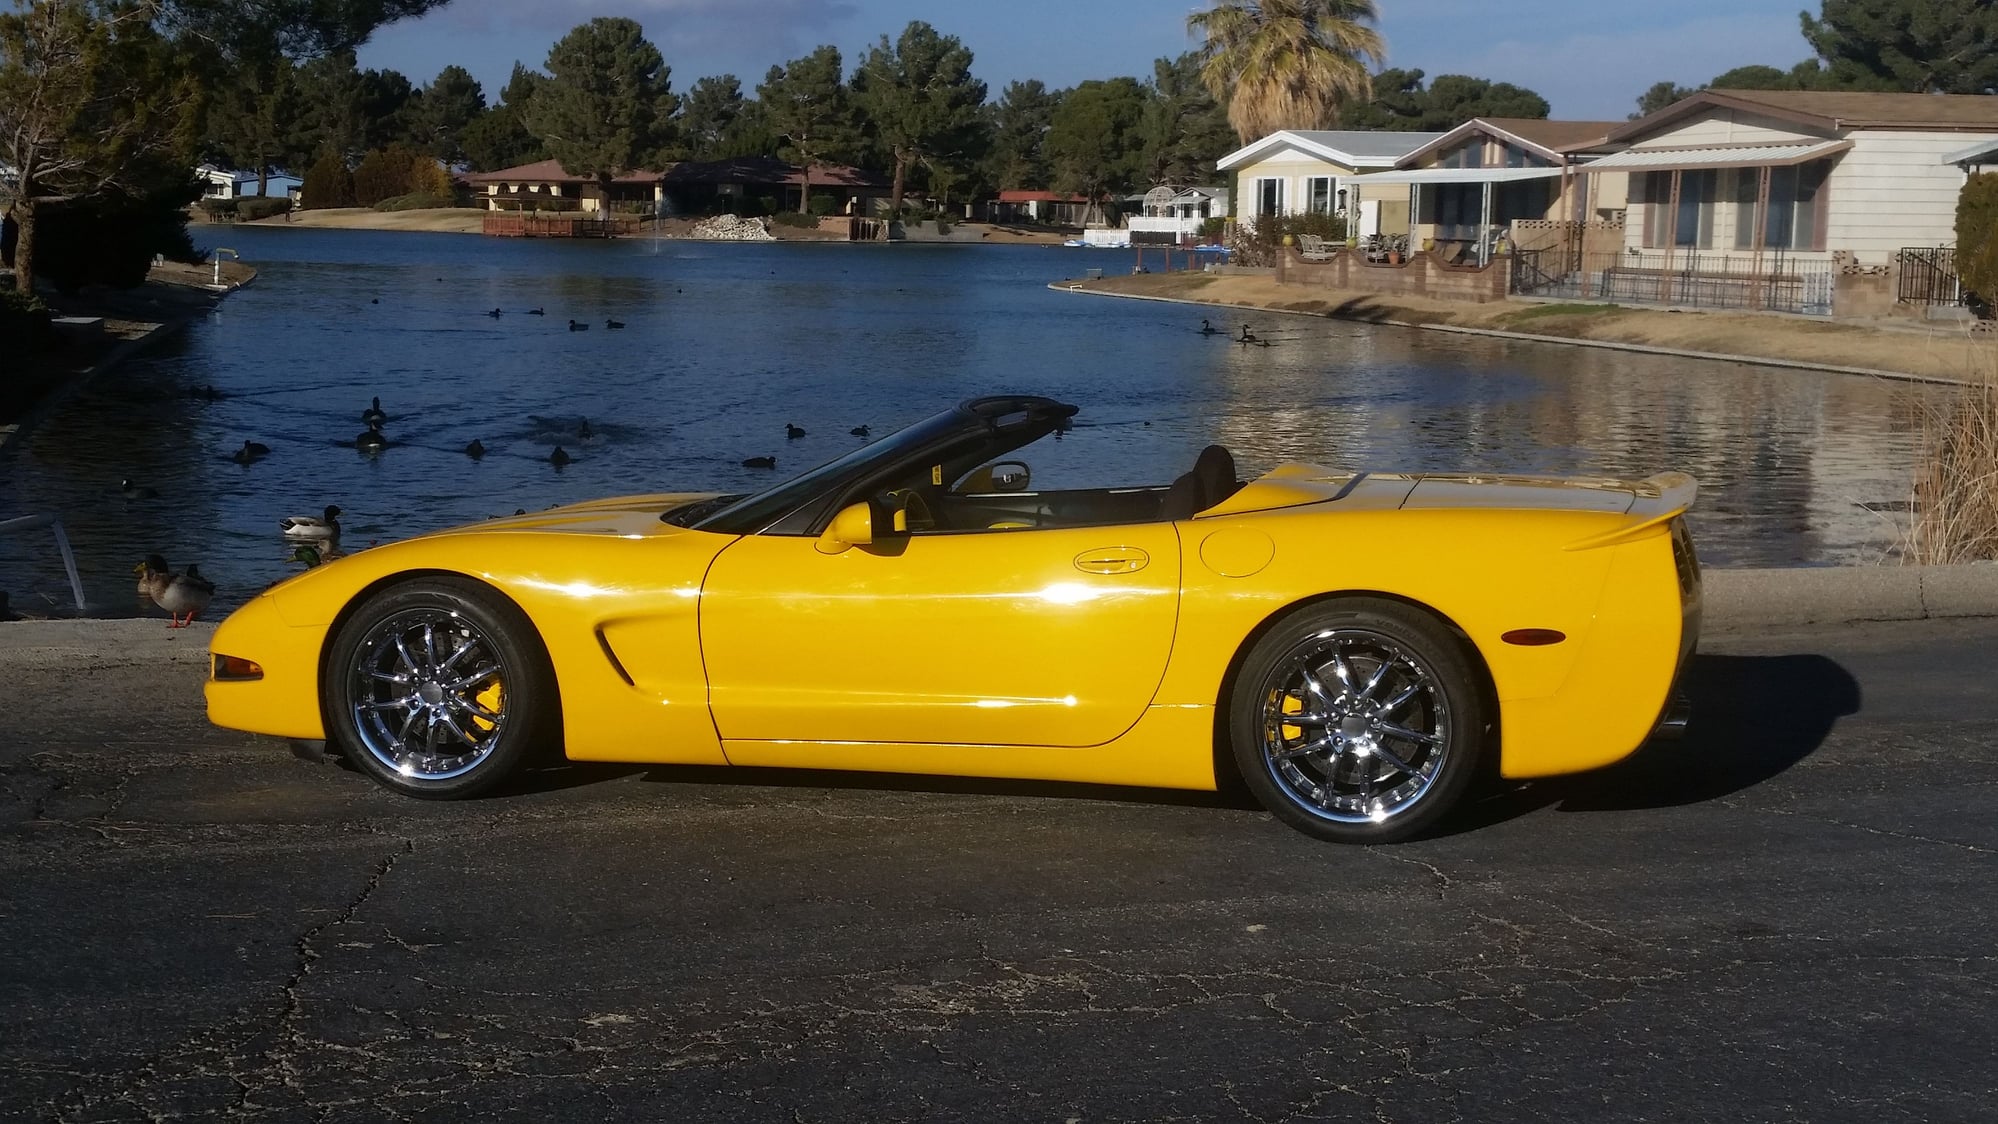 What do you think looks better on my mellenium yellow corvette, I did it on...